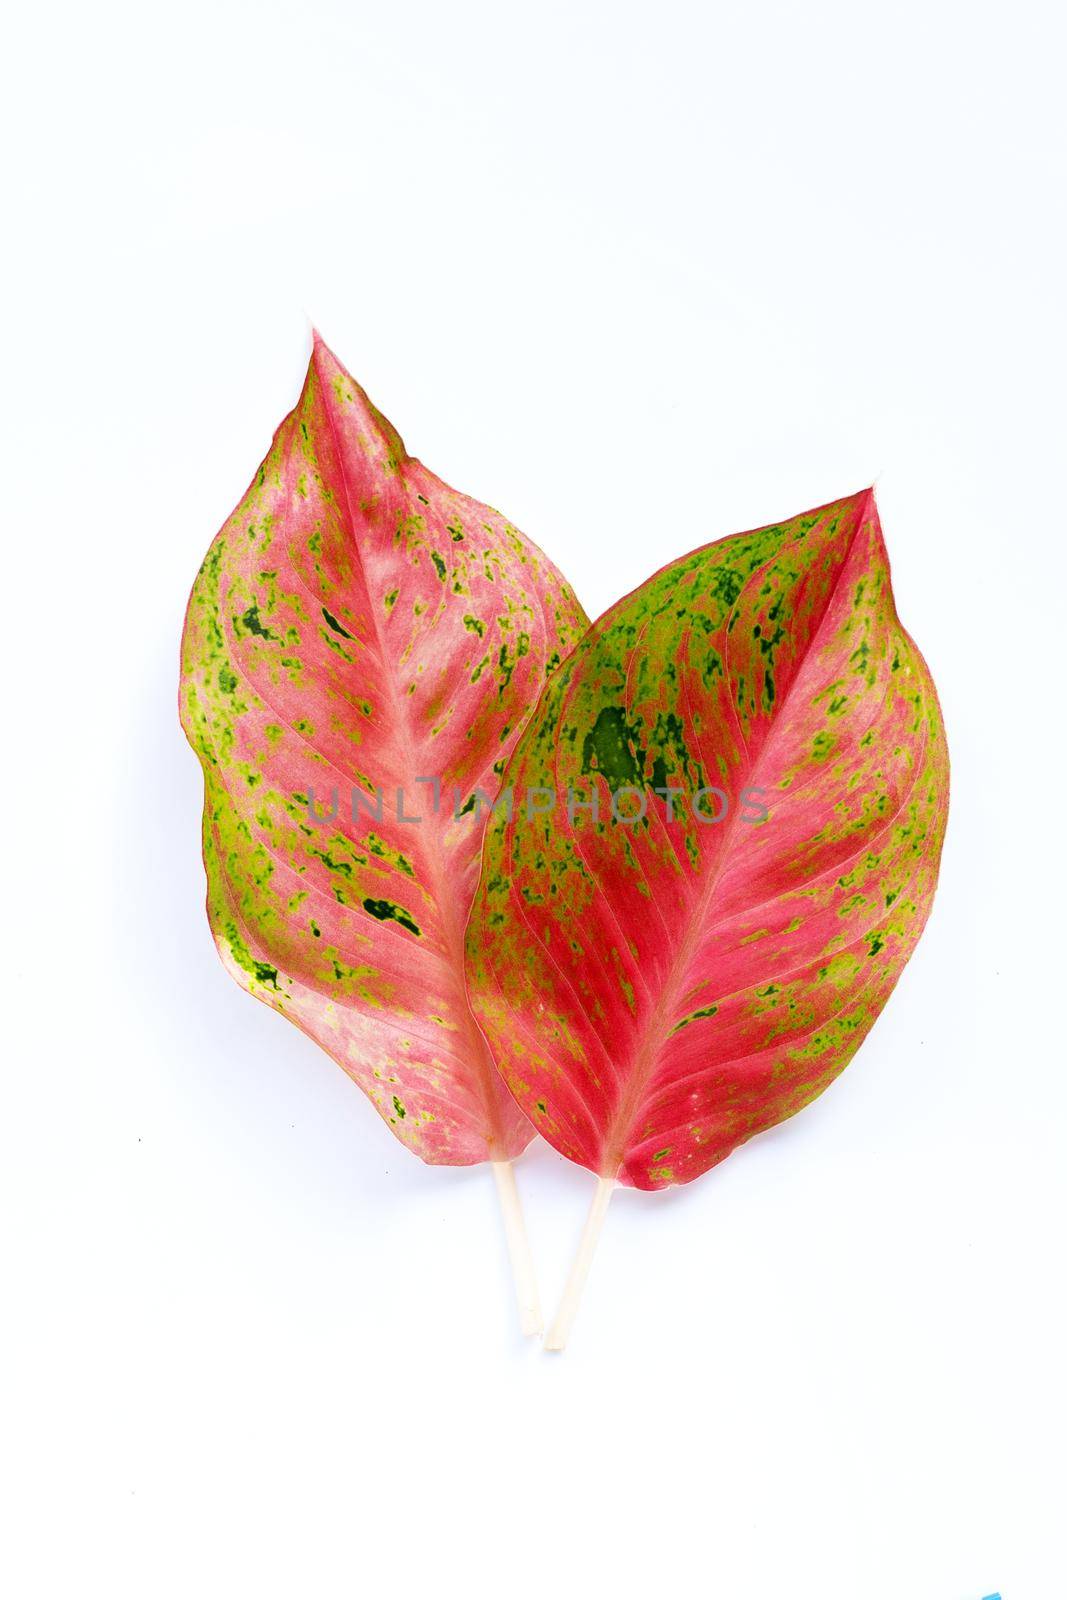 Colorful aglaonema leaves on white background.